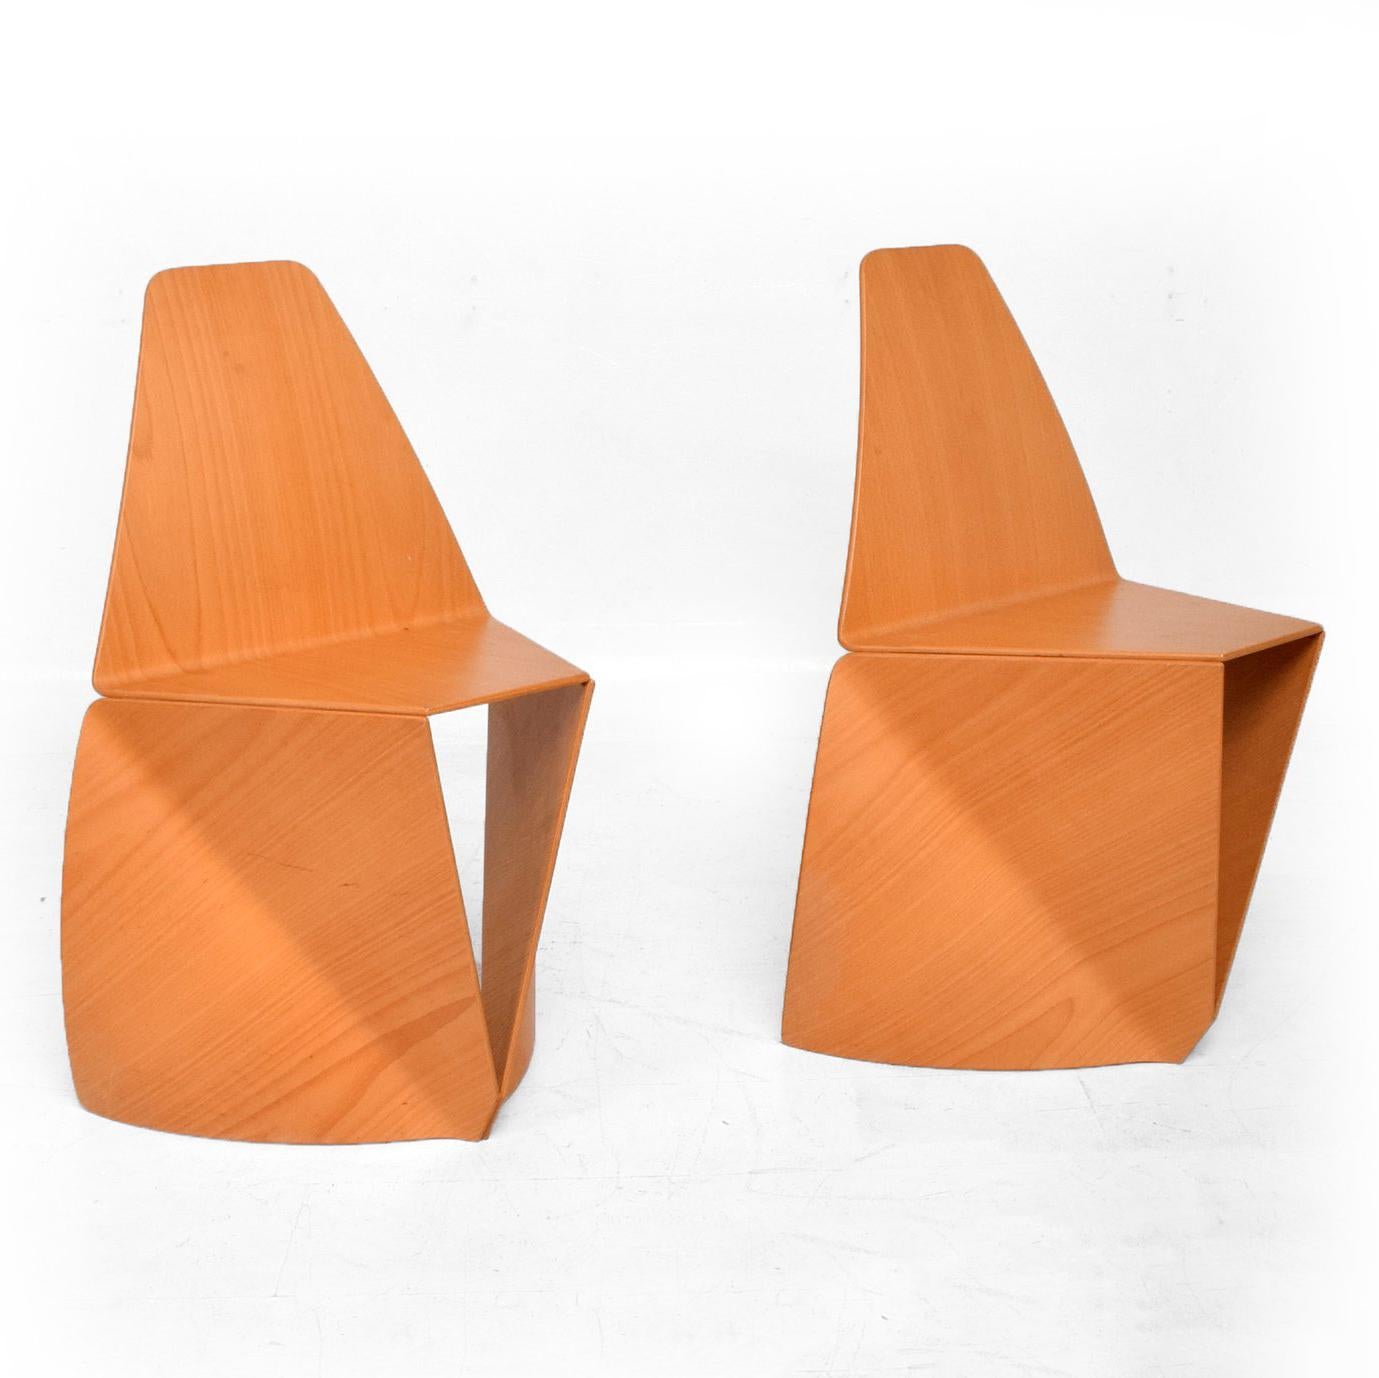 For your consideration: Pair of Stackable Chairs-2- in  Bent Plywood Birch Blonde Wood circa 1990s
Off the chart modern sculptural design. Originally had a paper label however, no information remains from the maker.
In the style of Sori Yanagui 